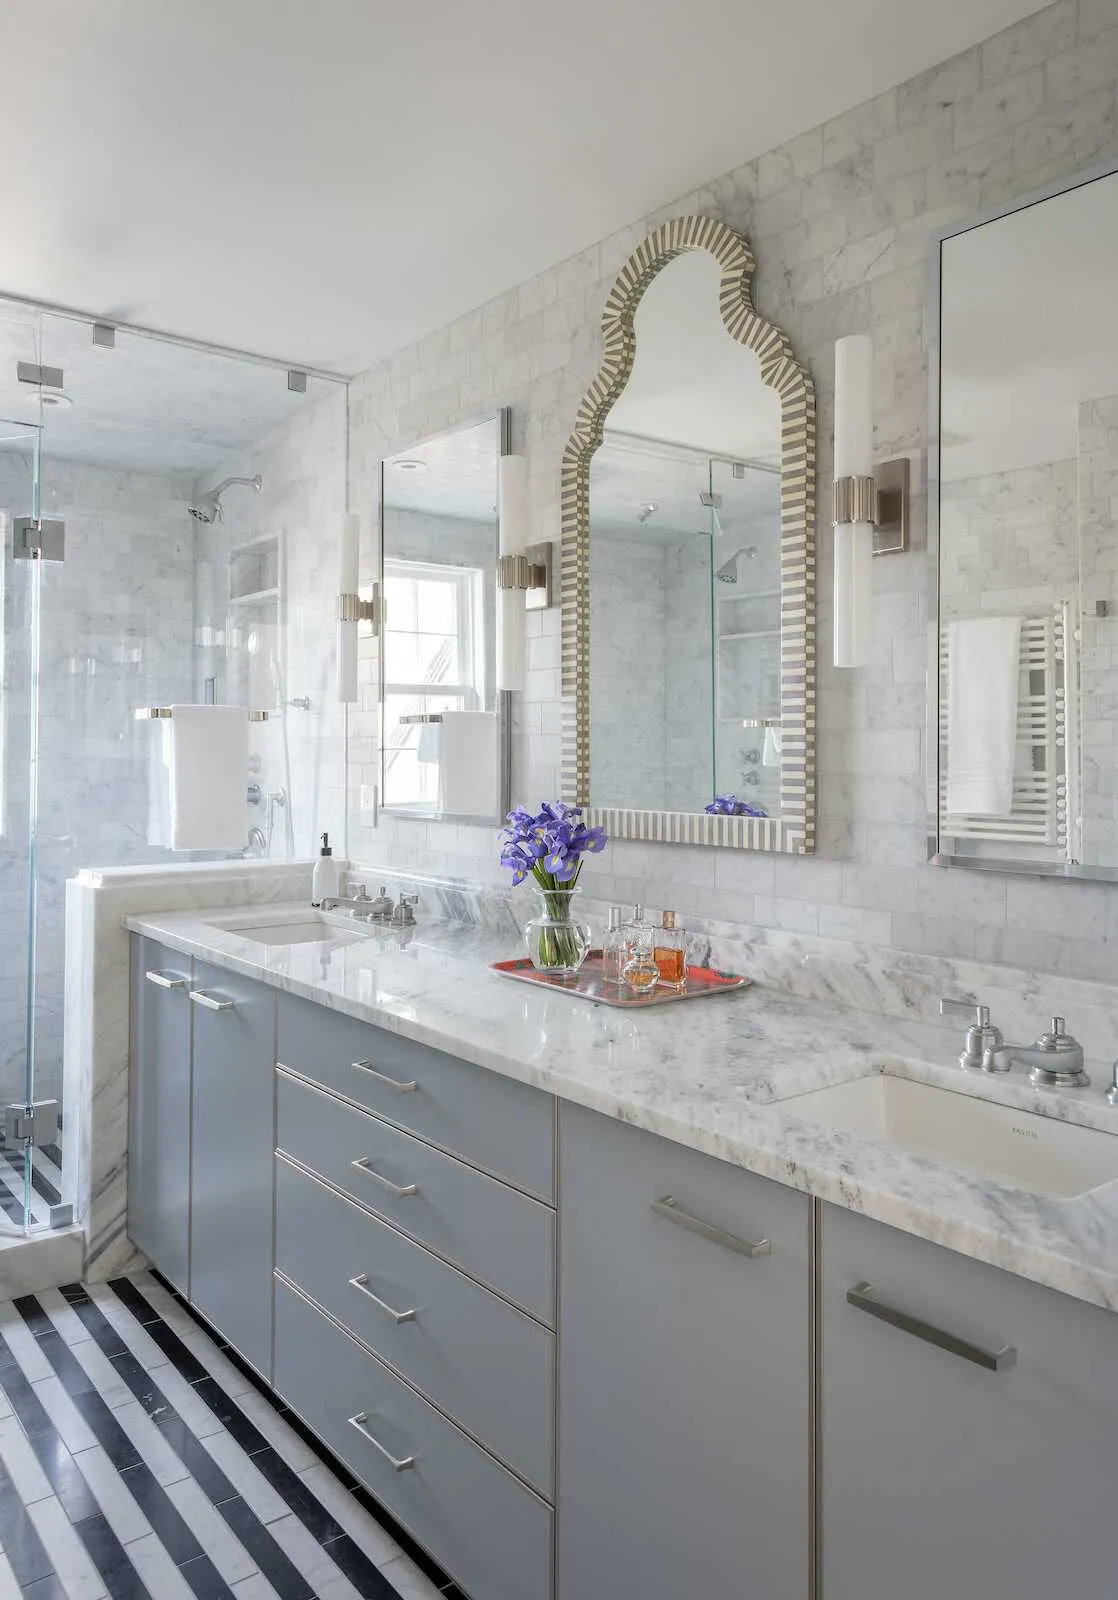 A custom vanity has a cararra marble countertop, two sinks and ample storage in the master bathroom.